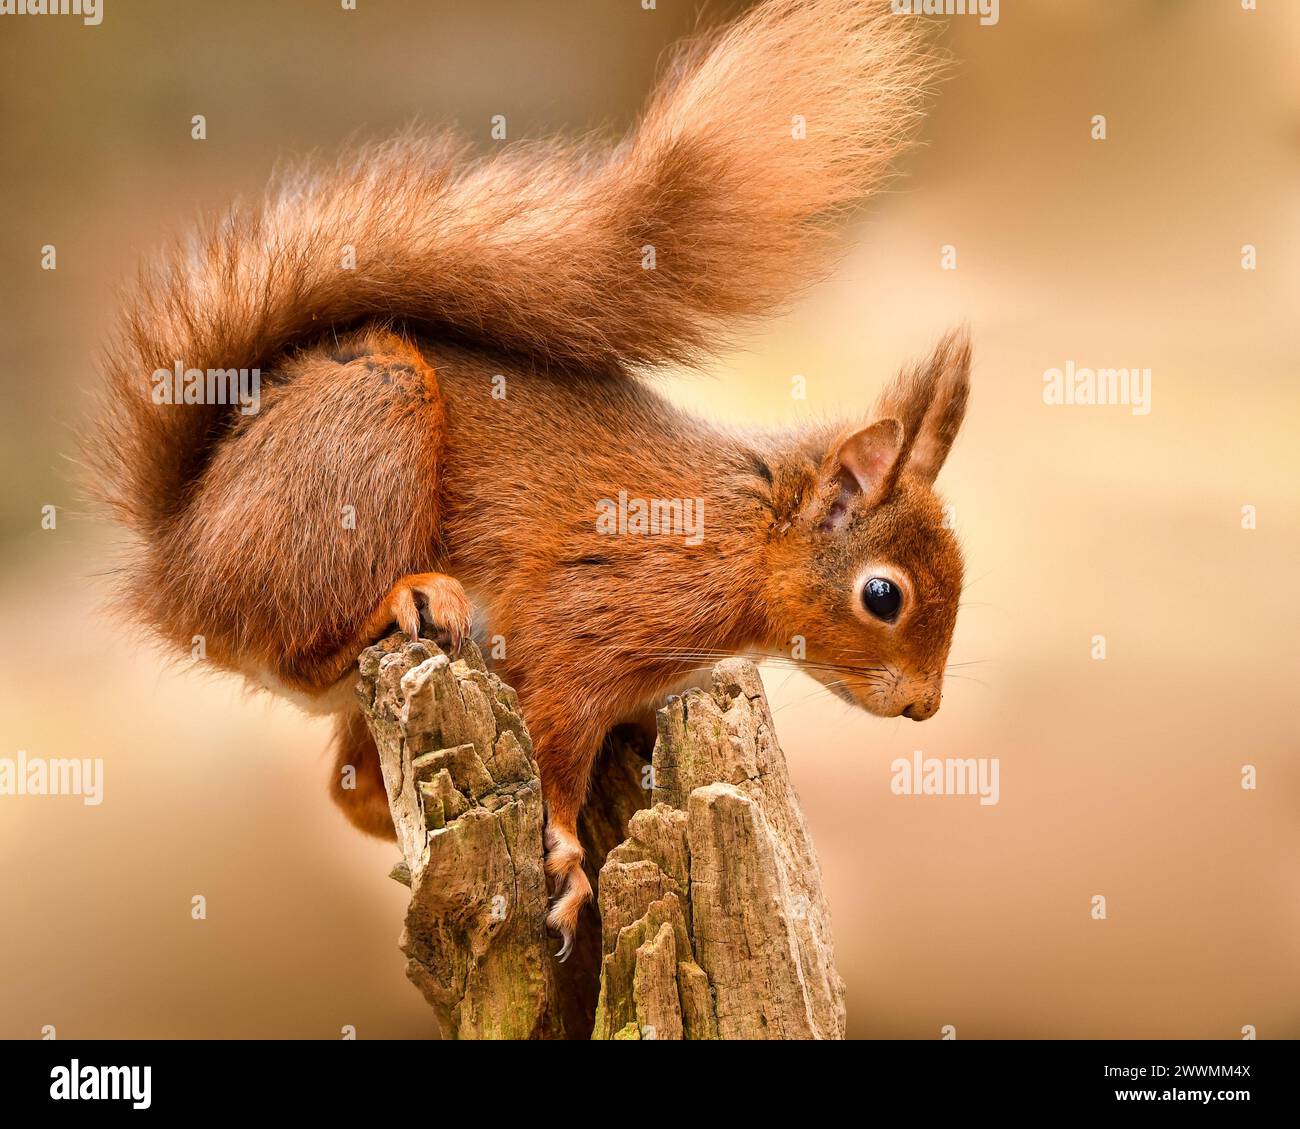 Cute and endangered Red Squirrel Stock Photo